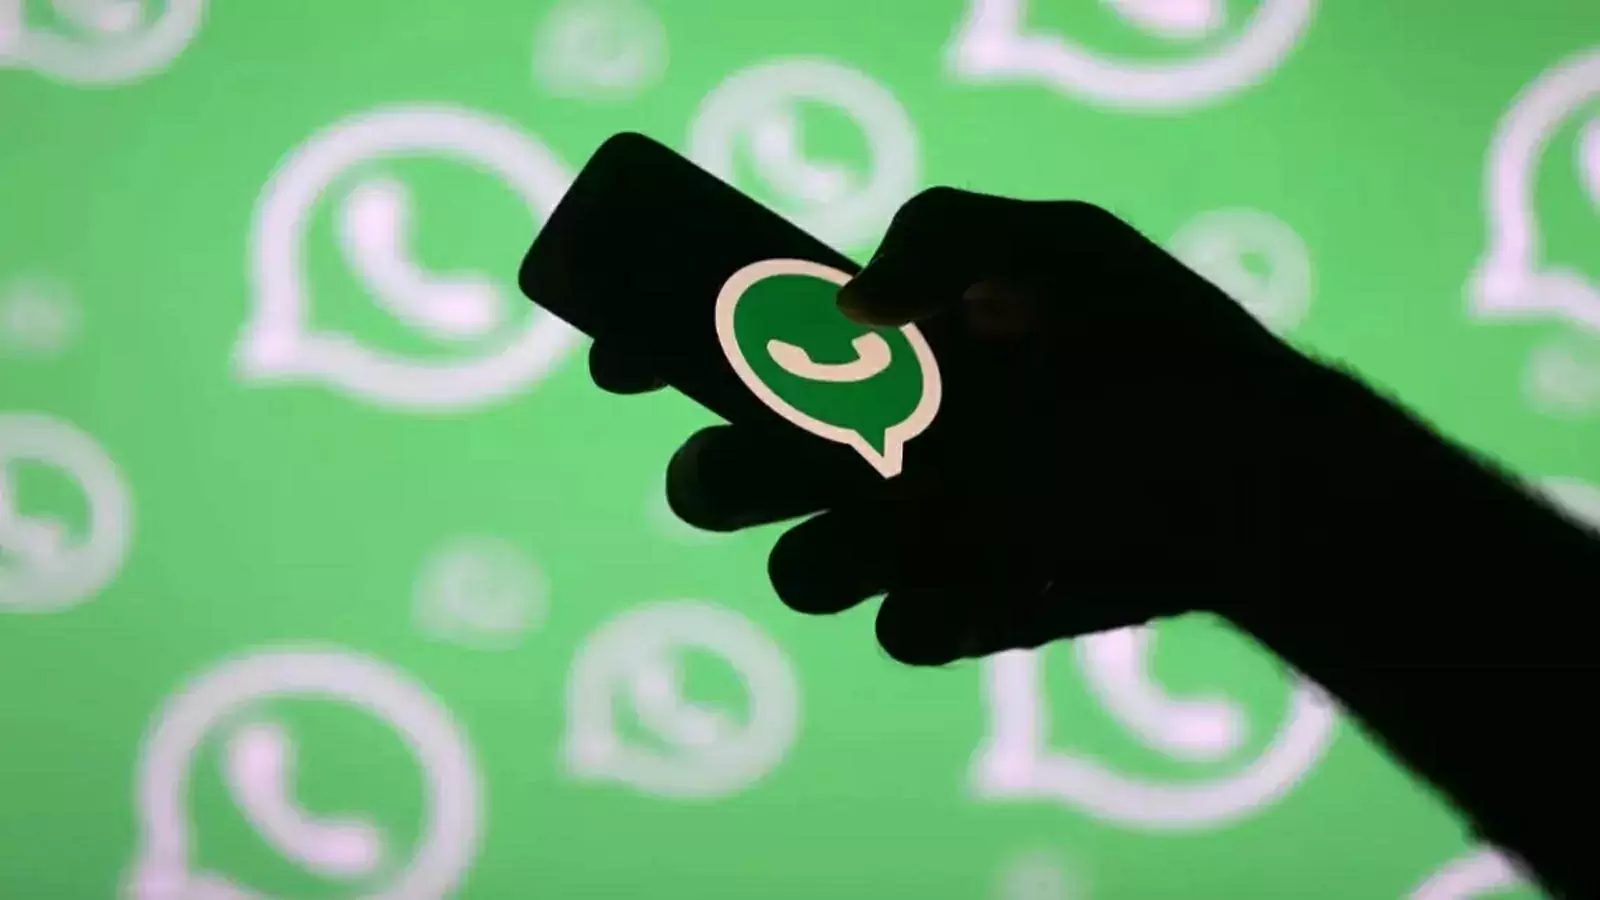 With the upcoming contact filter feature, messaging loved ones on WhatsApp will feel even more special